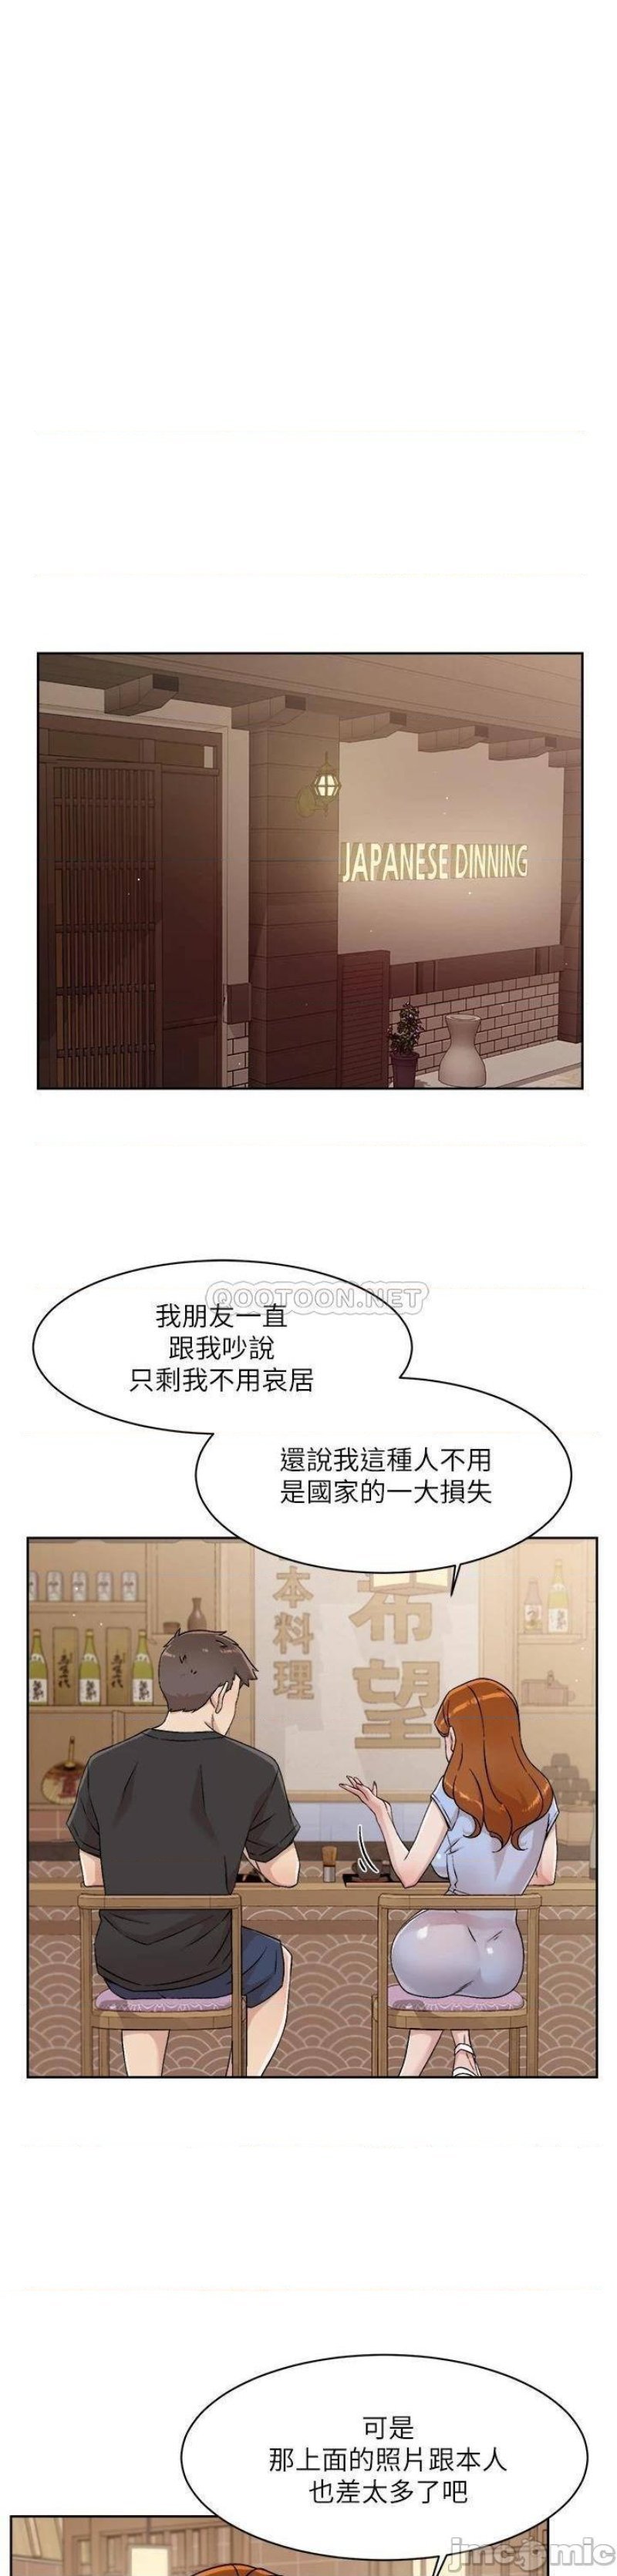 everything-about-best-friend-raw-chap-34-4